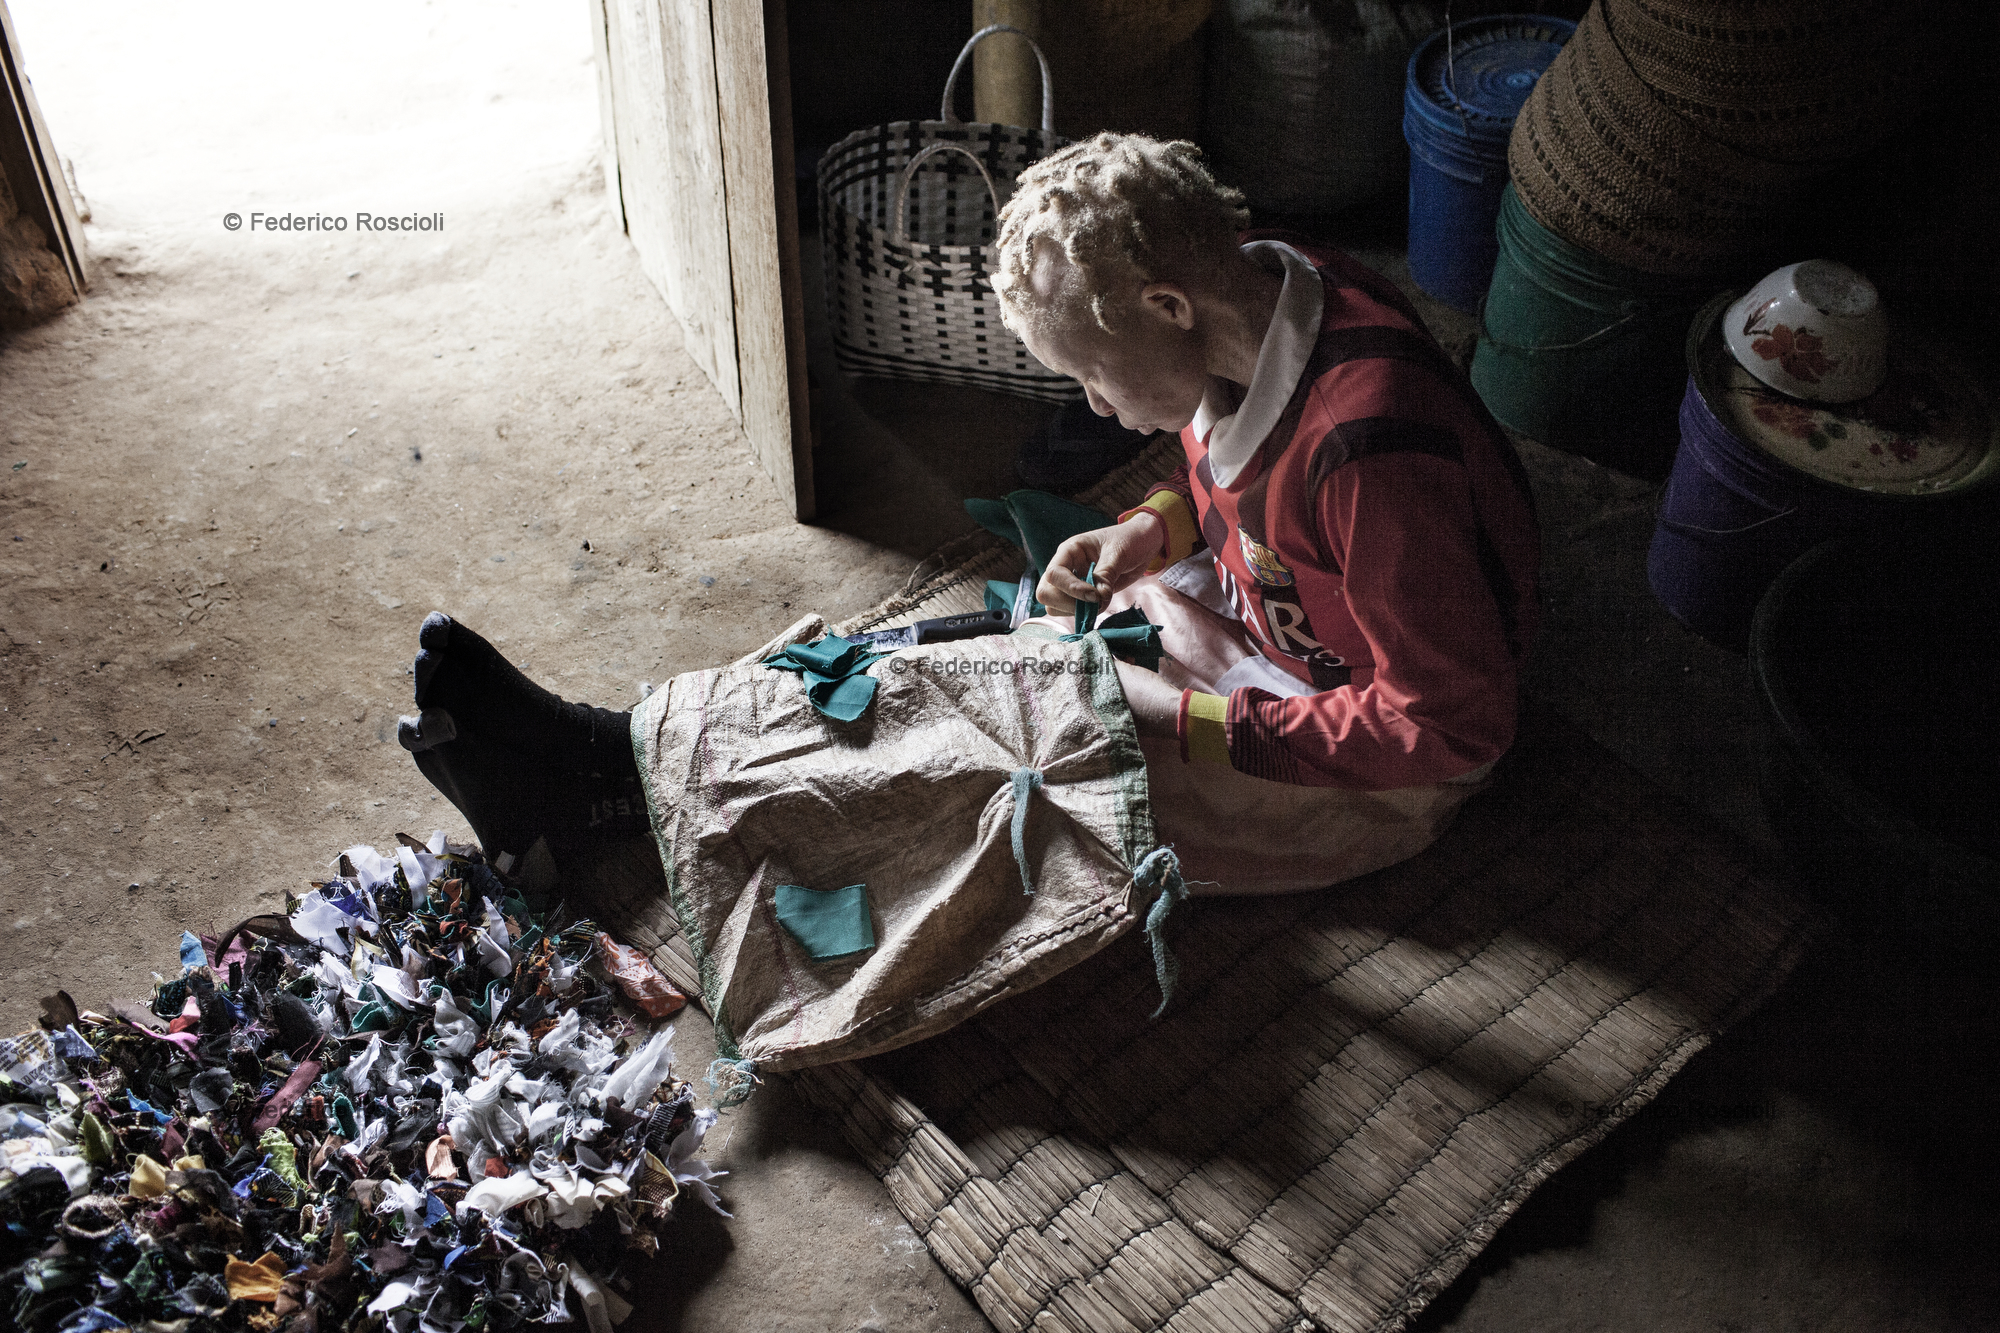 Ilula, Tanzania, July 21, 2014 - Alufema sawing a carpet. She is one of the persons with albinism of the Kilolo District censed by Tulime Association. There have never been killings in this area, so the first enemy of albinos is the sun. The census was fundamental in order to be able to help the albinos of the area with sunscreen cream and medical check-up. The national census does not provide correct and actual data about albinism.